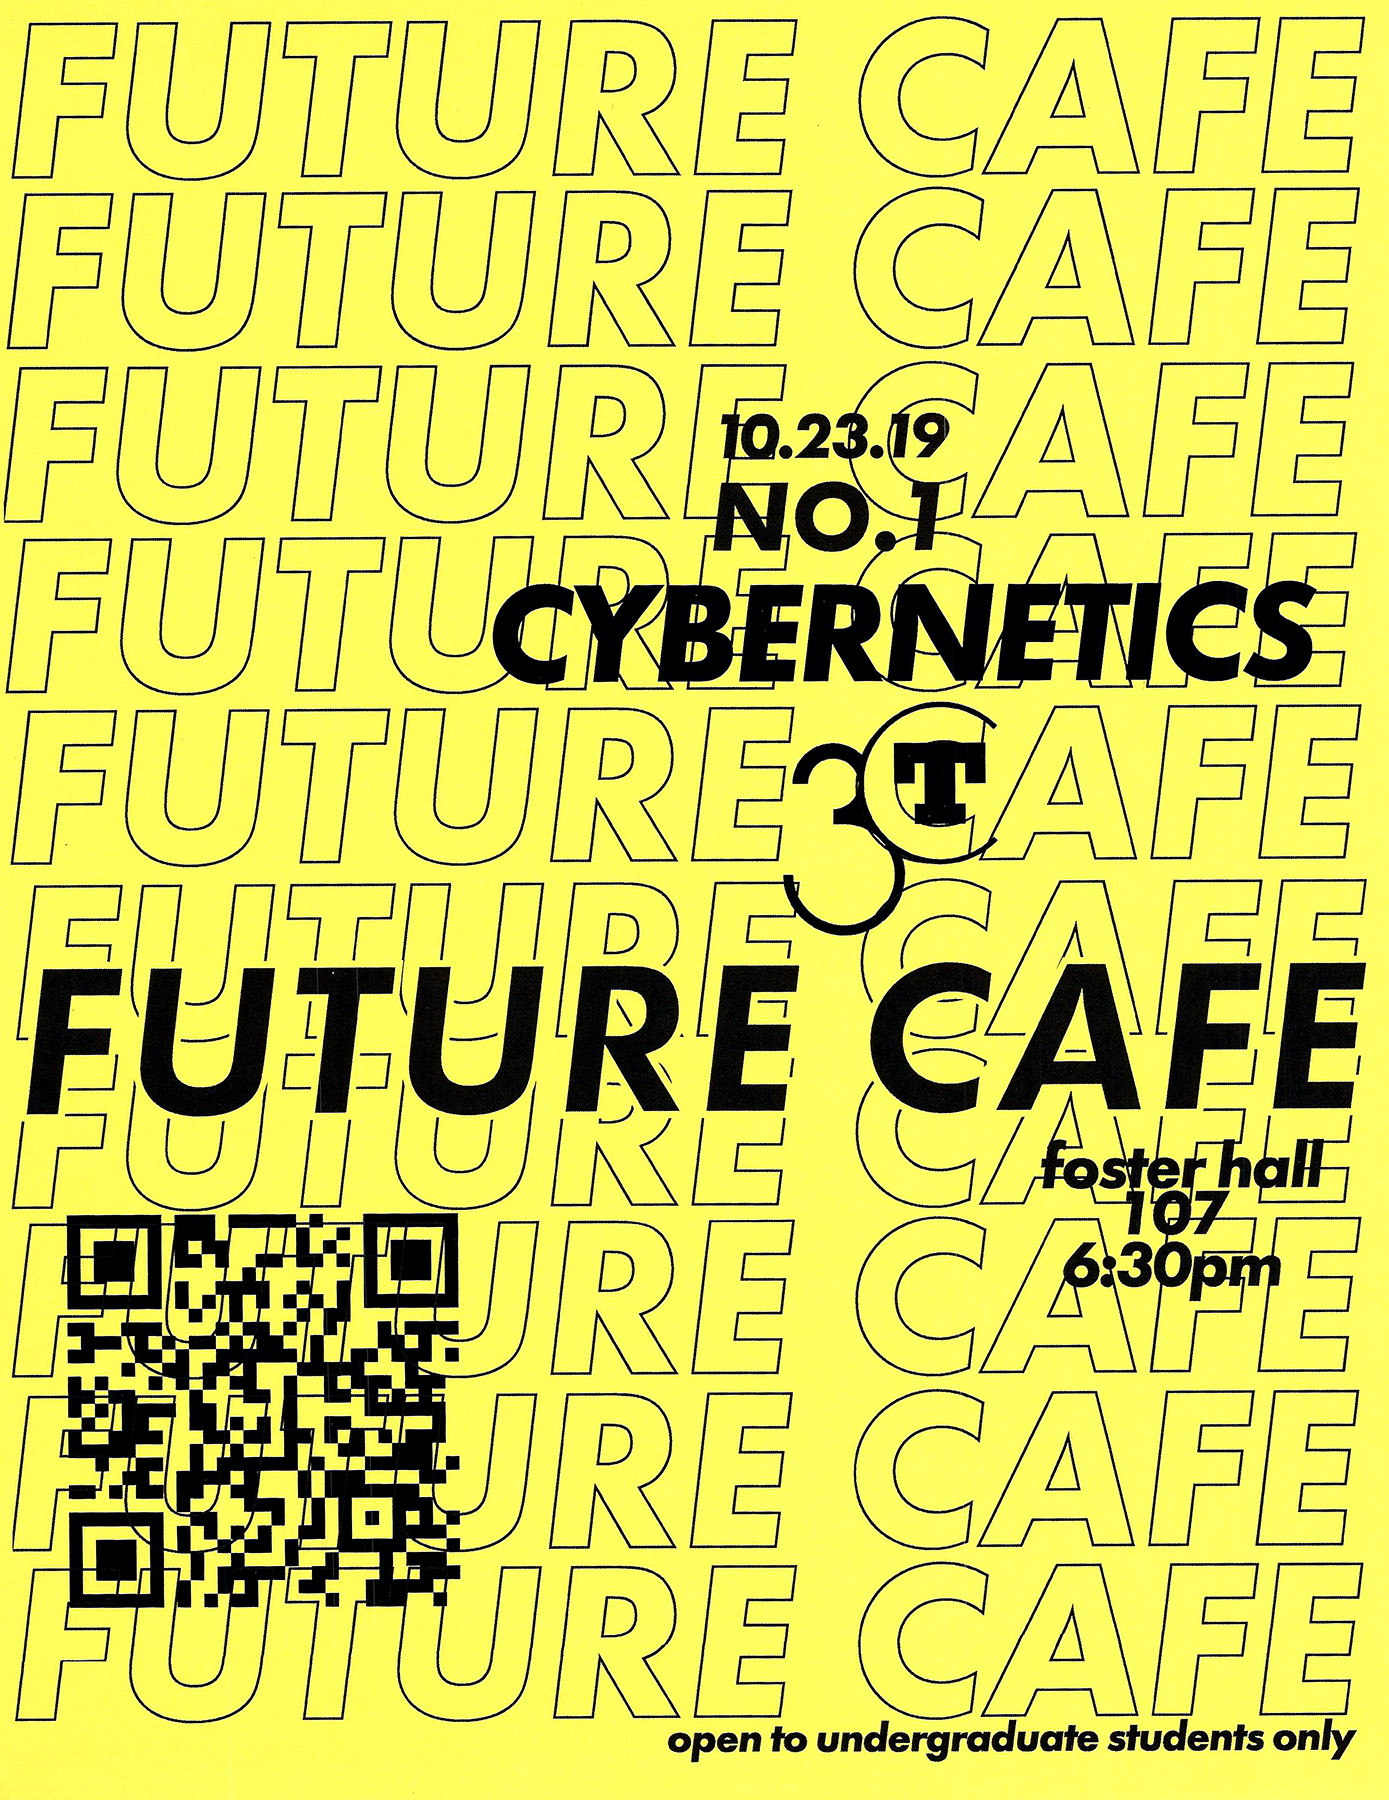 poster for Future Cafe Cybernetics event with black text on yellow